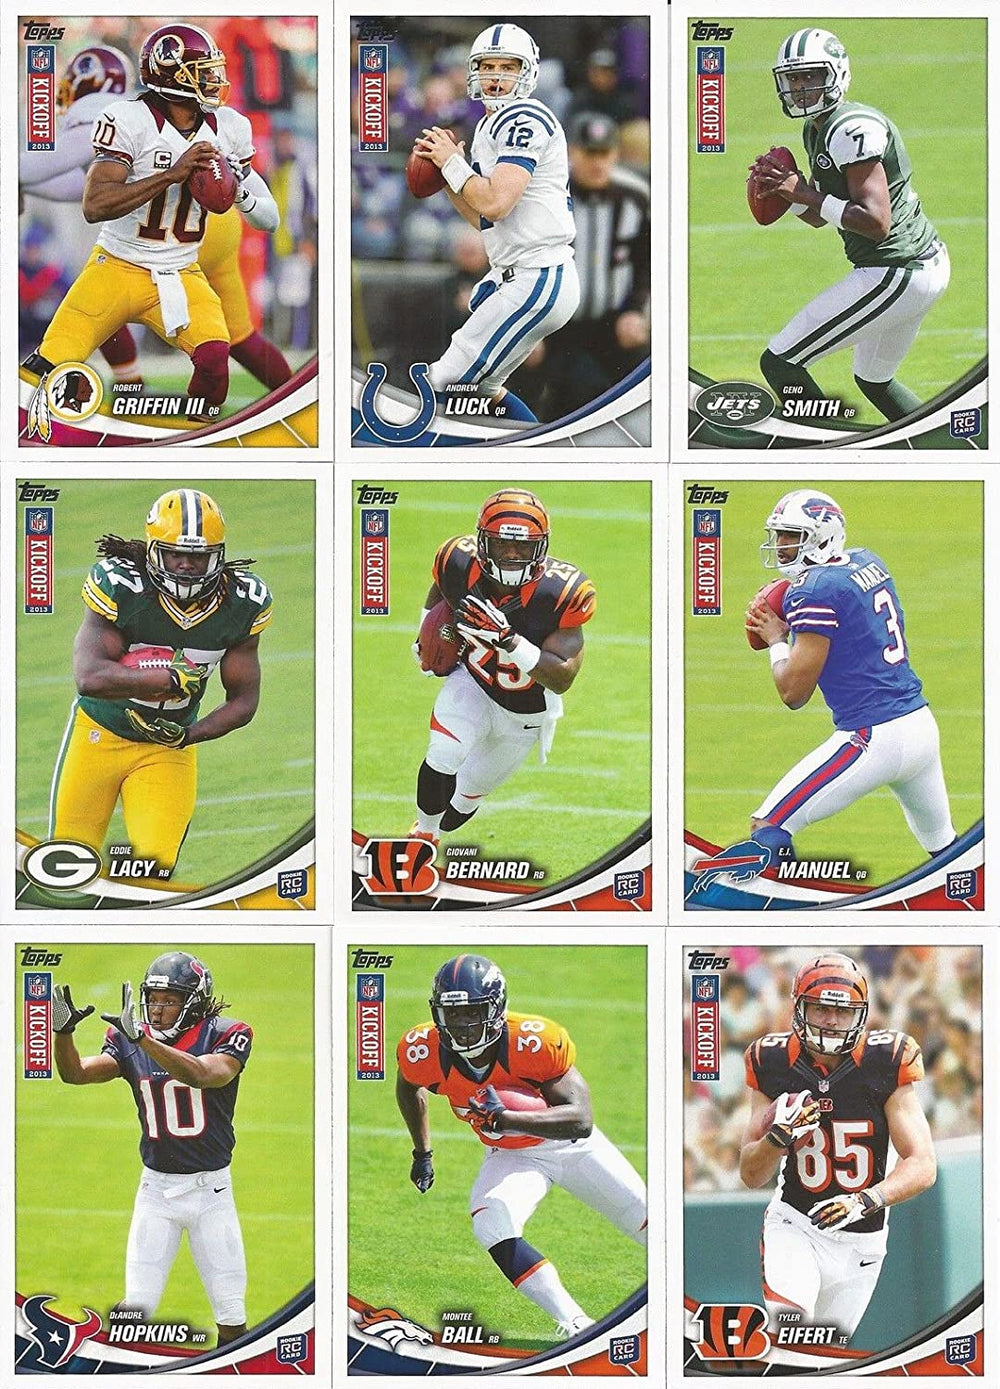 2013 Topps Kickoff Football Series Complete Mint Set with Rookies Cards, Stars and Hall of Famers